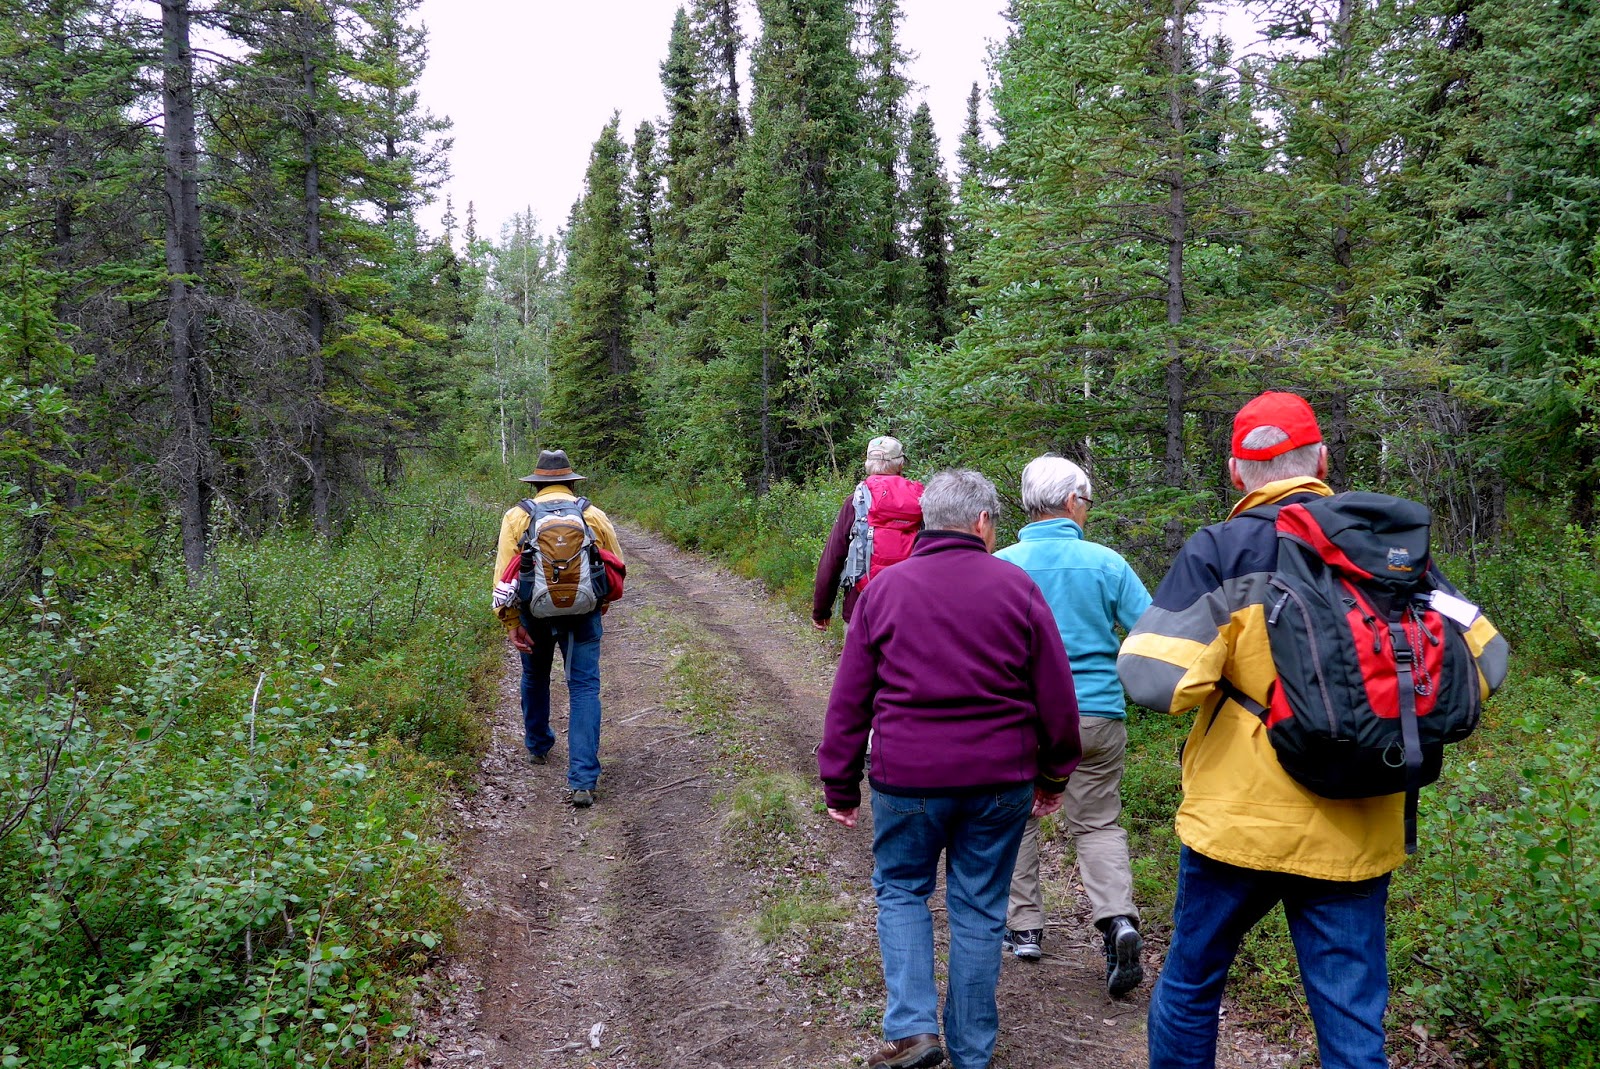 We are off on our hike in Wrangell - St. Elias National Park Preserve